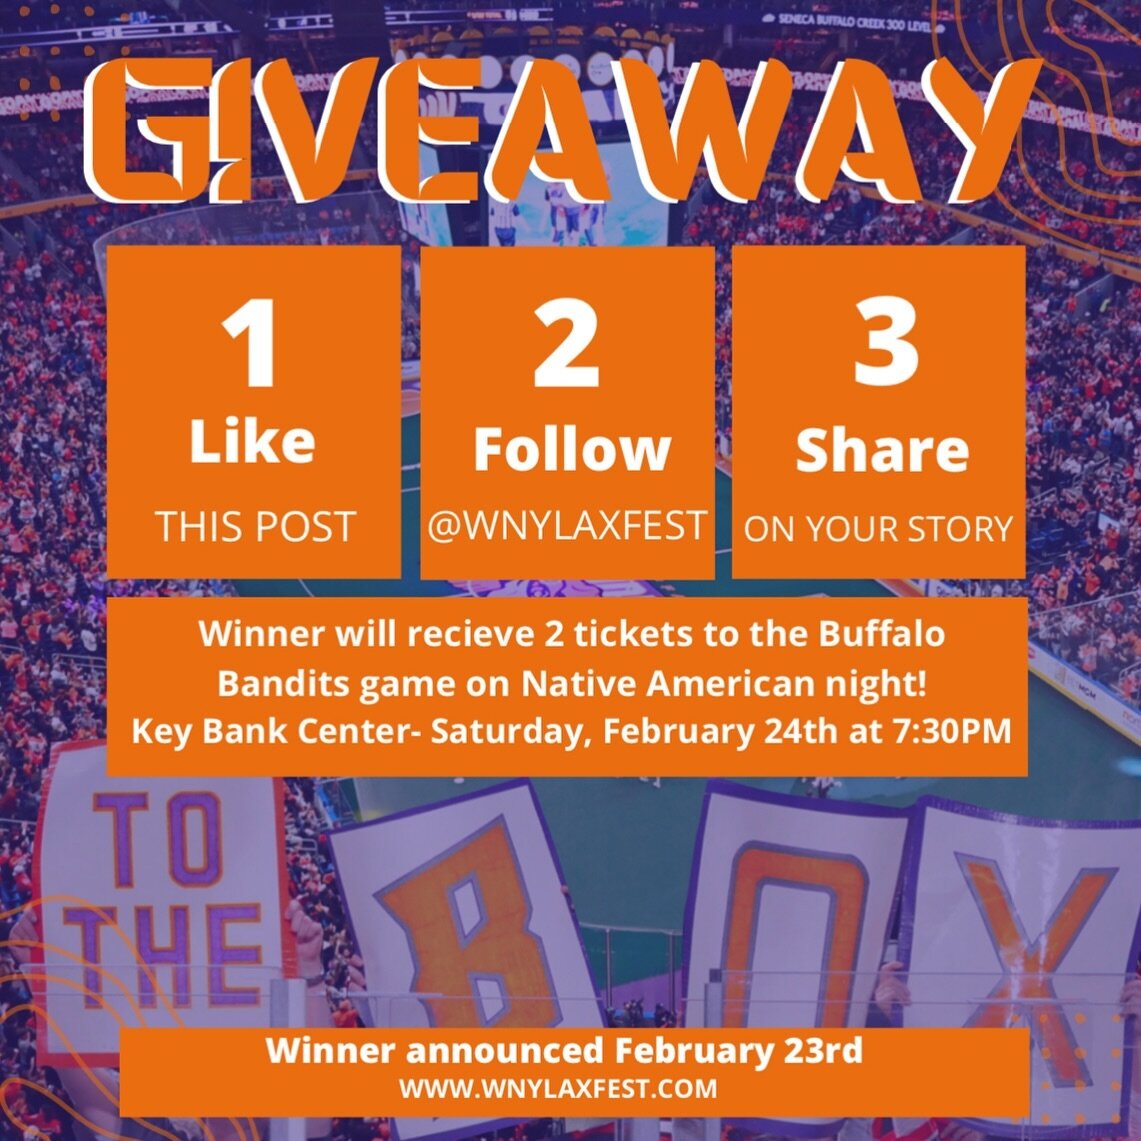 ENTER TO WIN BUFFALO BANDITS TICKETS‼️
🦬🥍

To enter:
1. Like this post
2. Follow us
3. Share to your story
Comment and tag friends for extra entries!

Winner will be chosen and contacted directly from this account on February 23rd! 

#GoBandits #Co